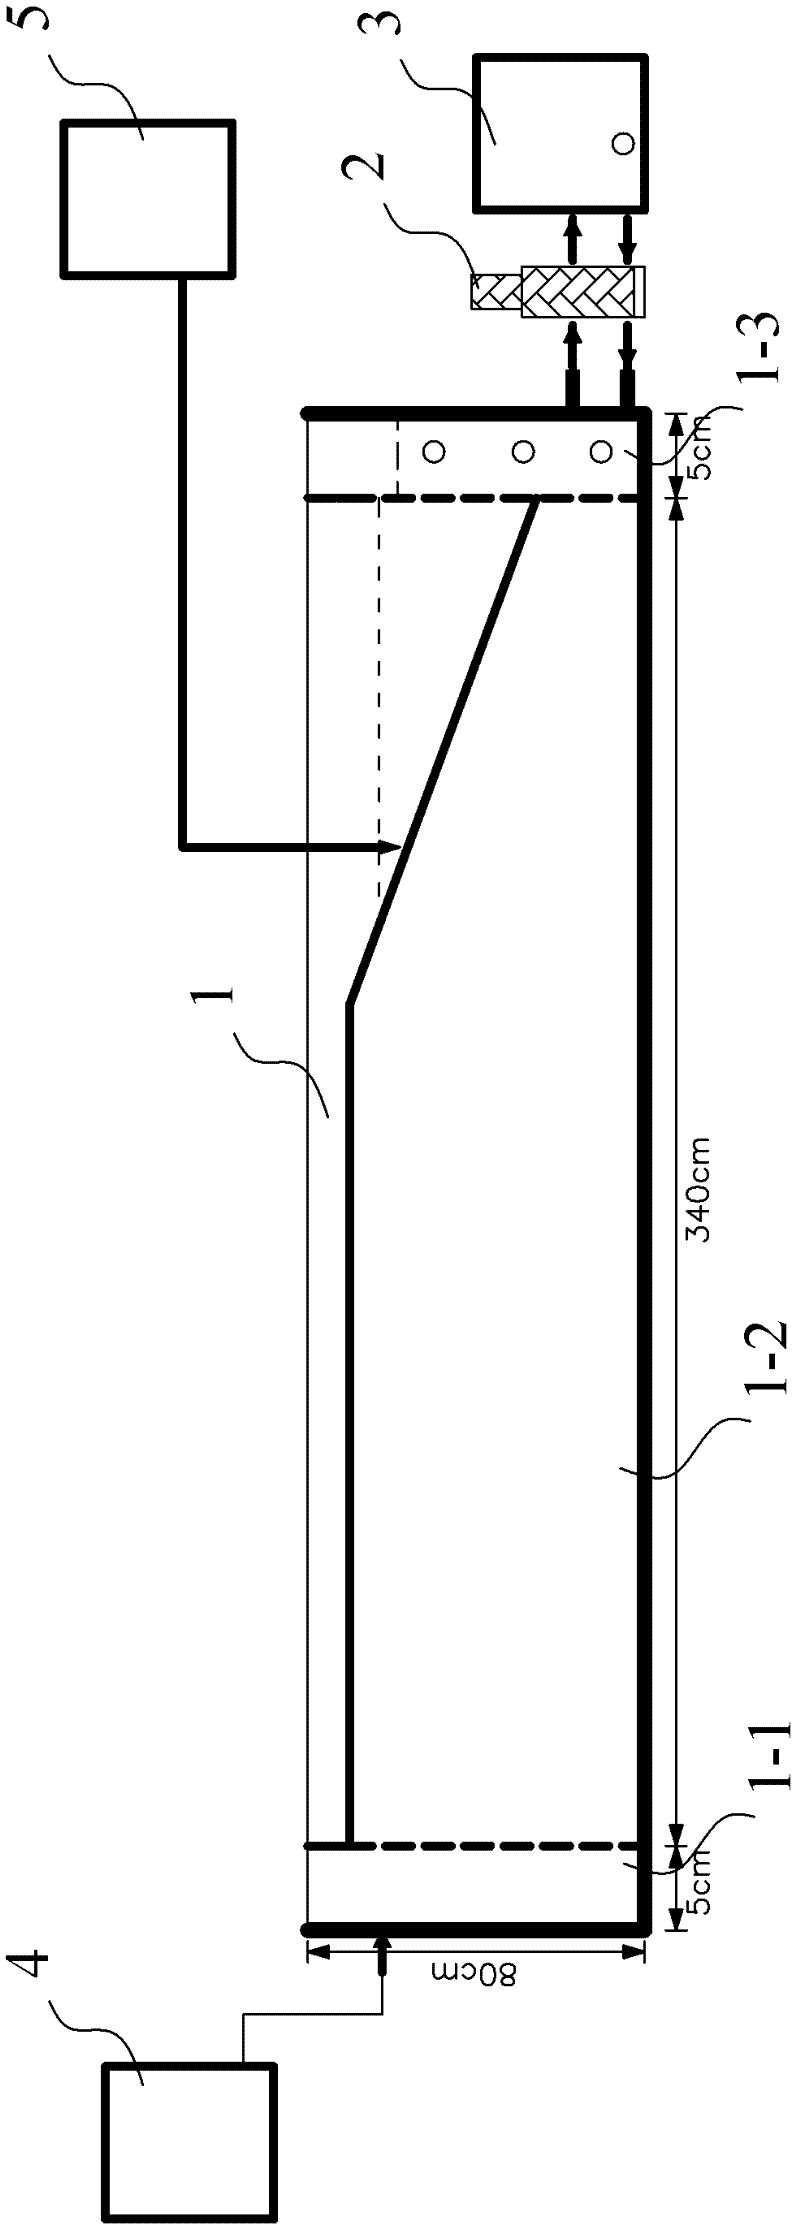 Flat plate tracing simulating device system and simulating method for salt water intrusion under tidal action